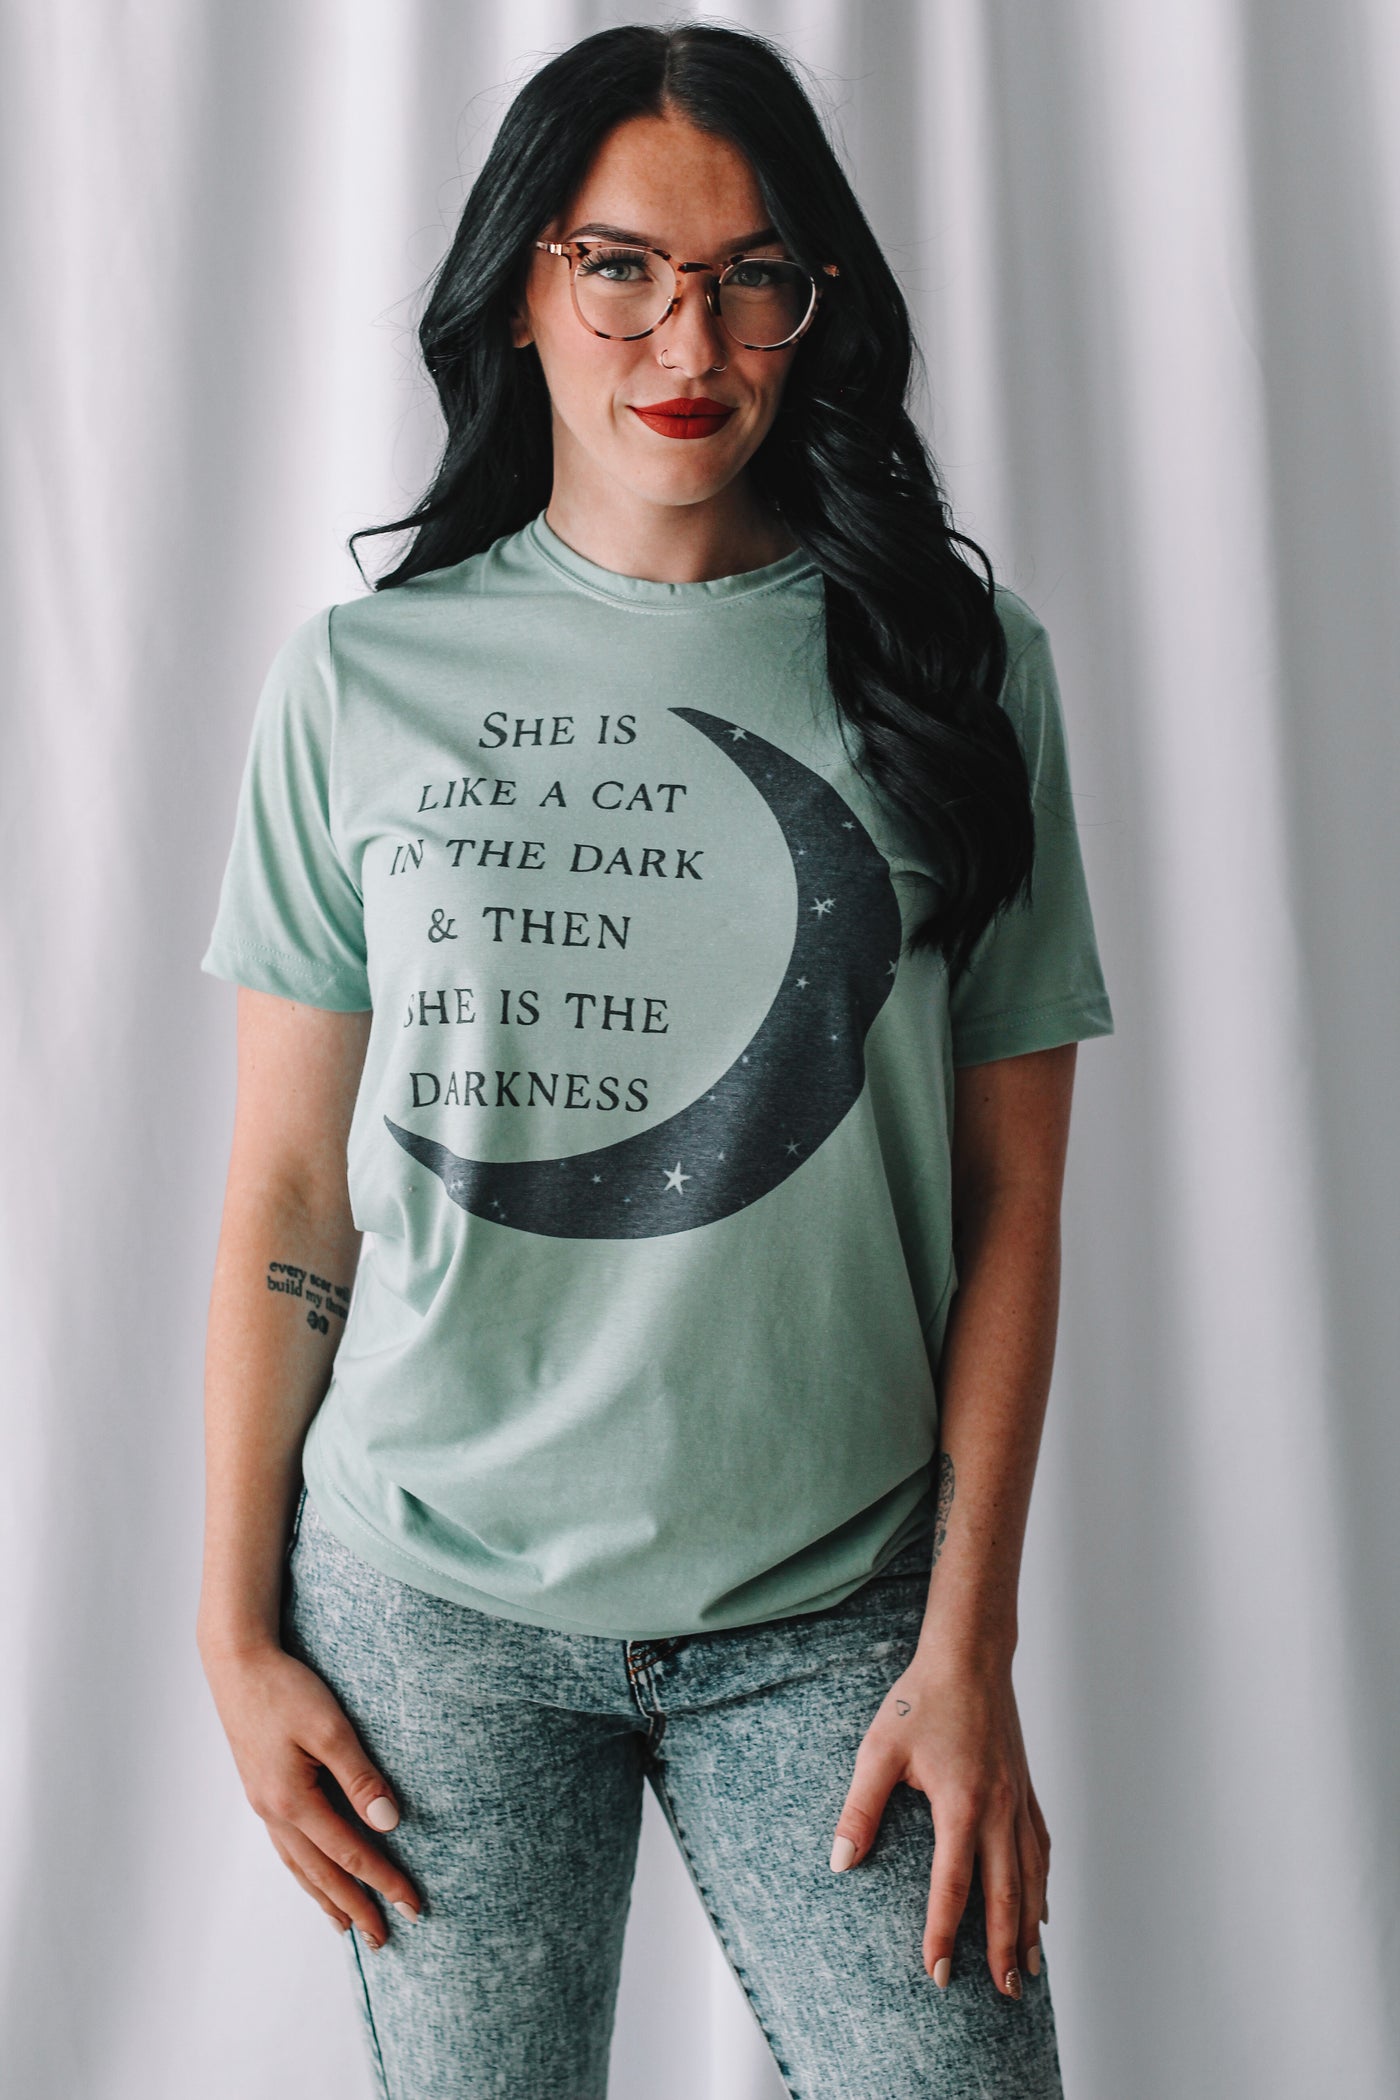 She’s the Darkness Tee